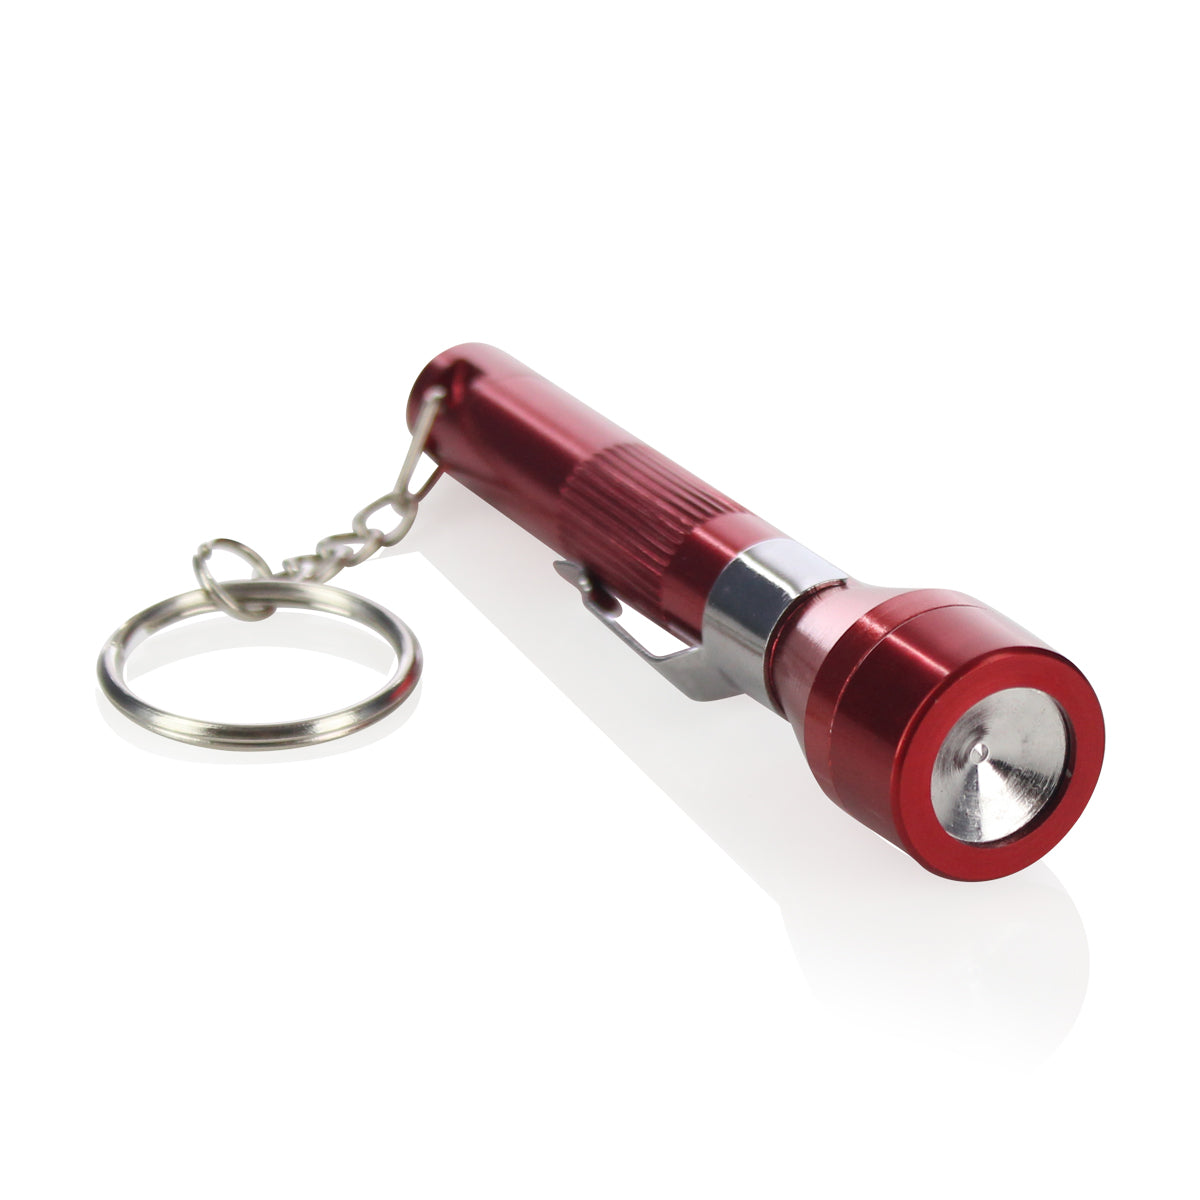 3 1/2" Metal Flashlight Novelty Pipe - Assorted Colors